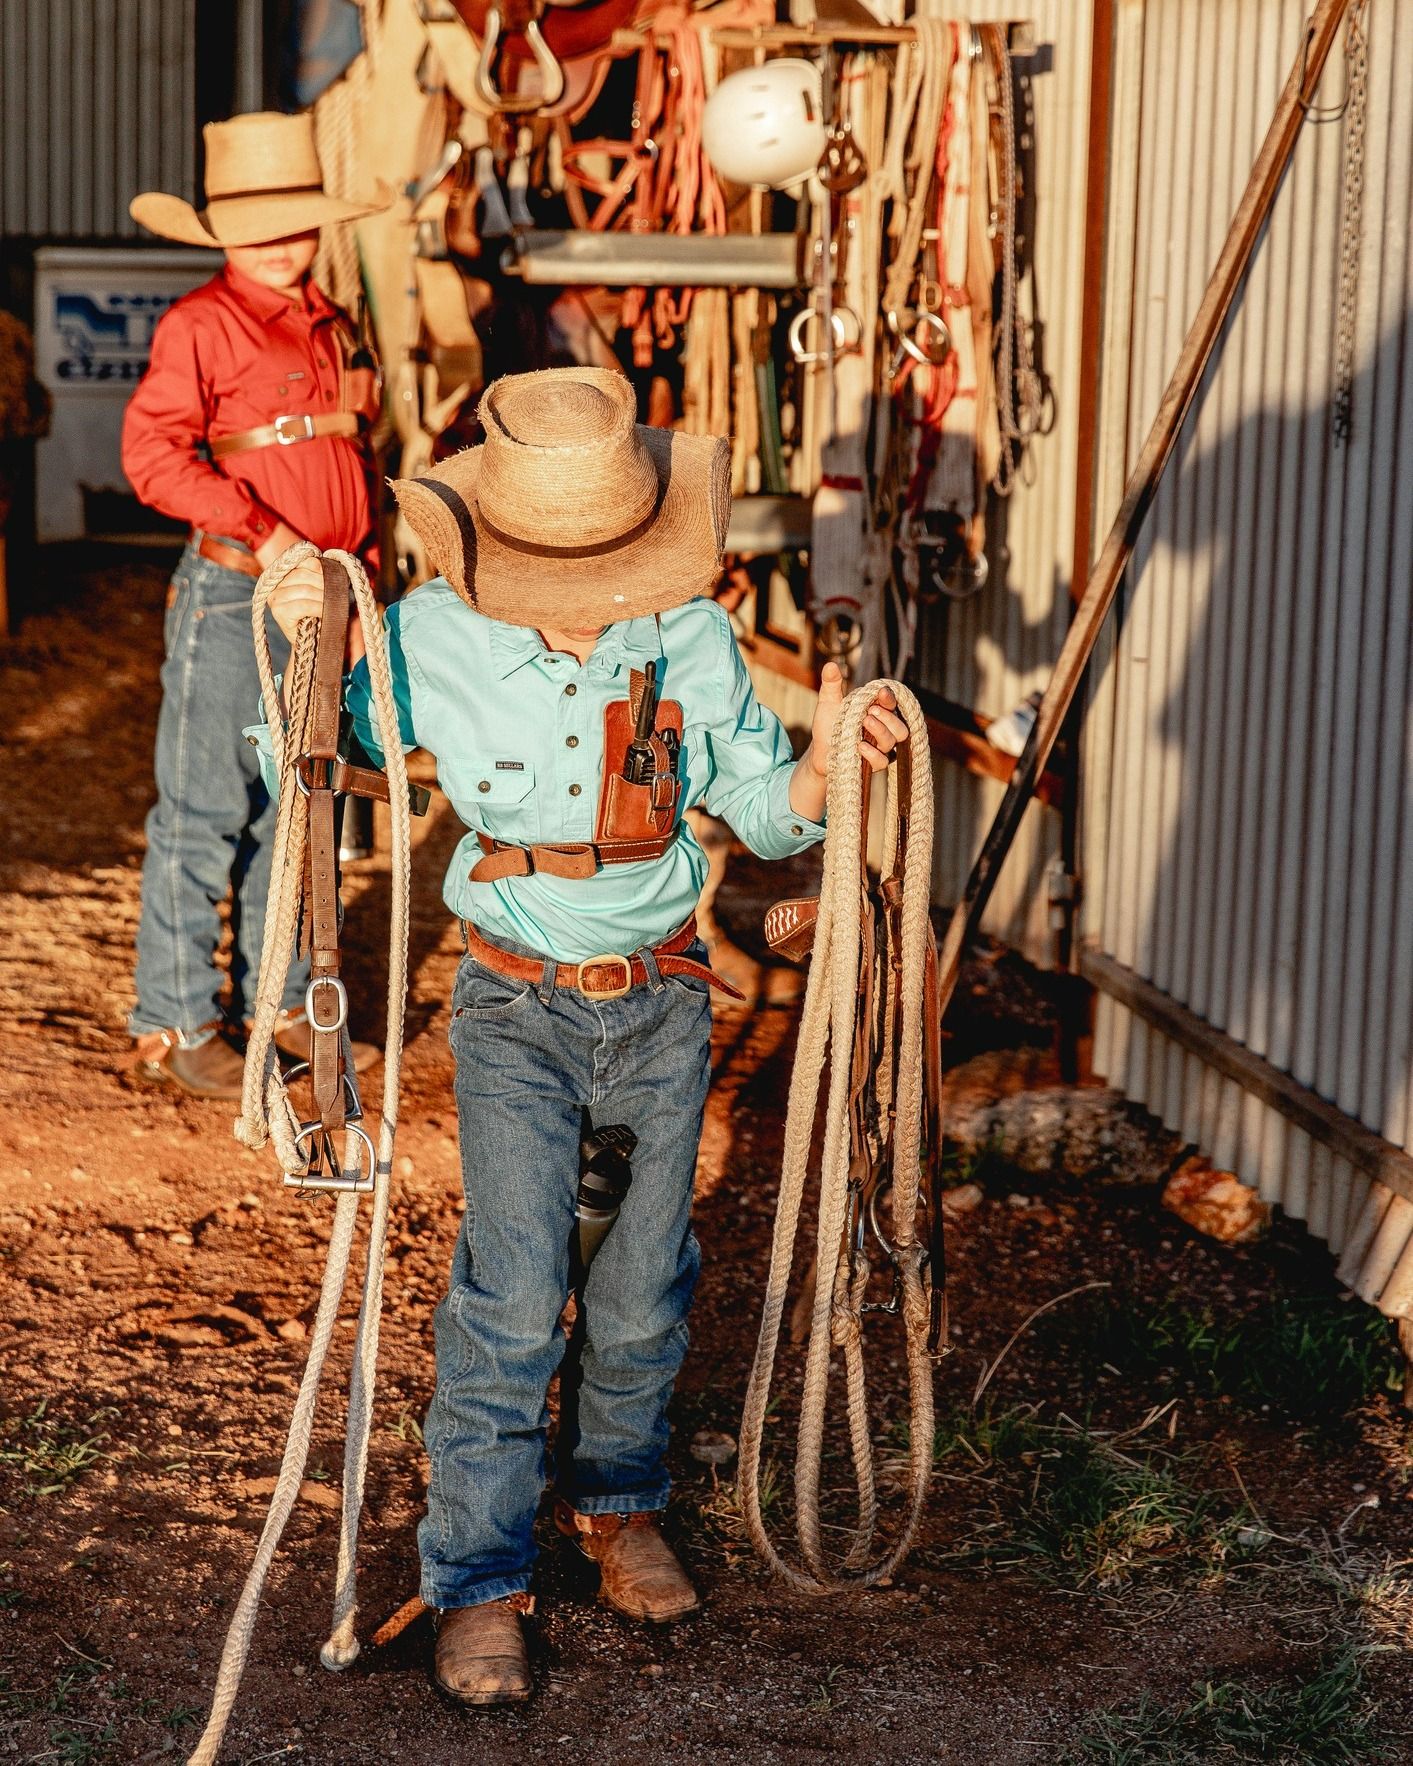 Two little jackaroos off to work

📷: picsbytay_

Shop junior workshirts via the link in b...

#RBSellars